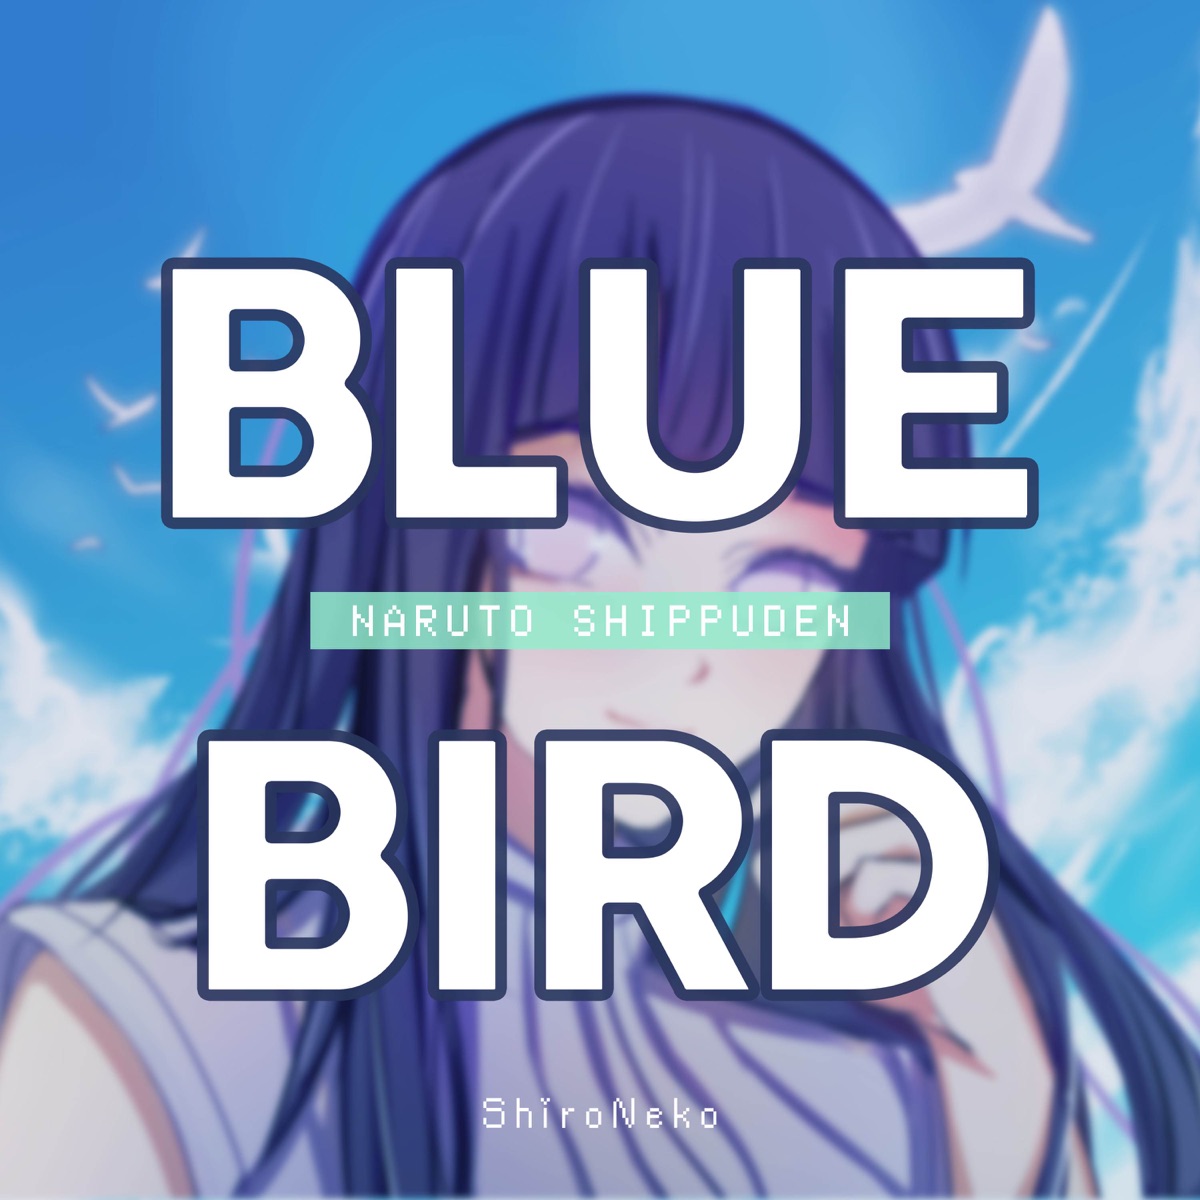 bluebird app download for android